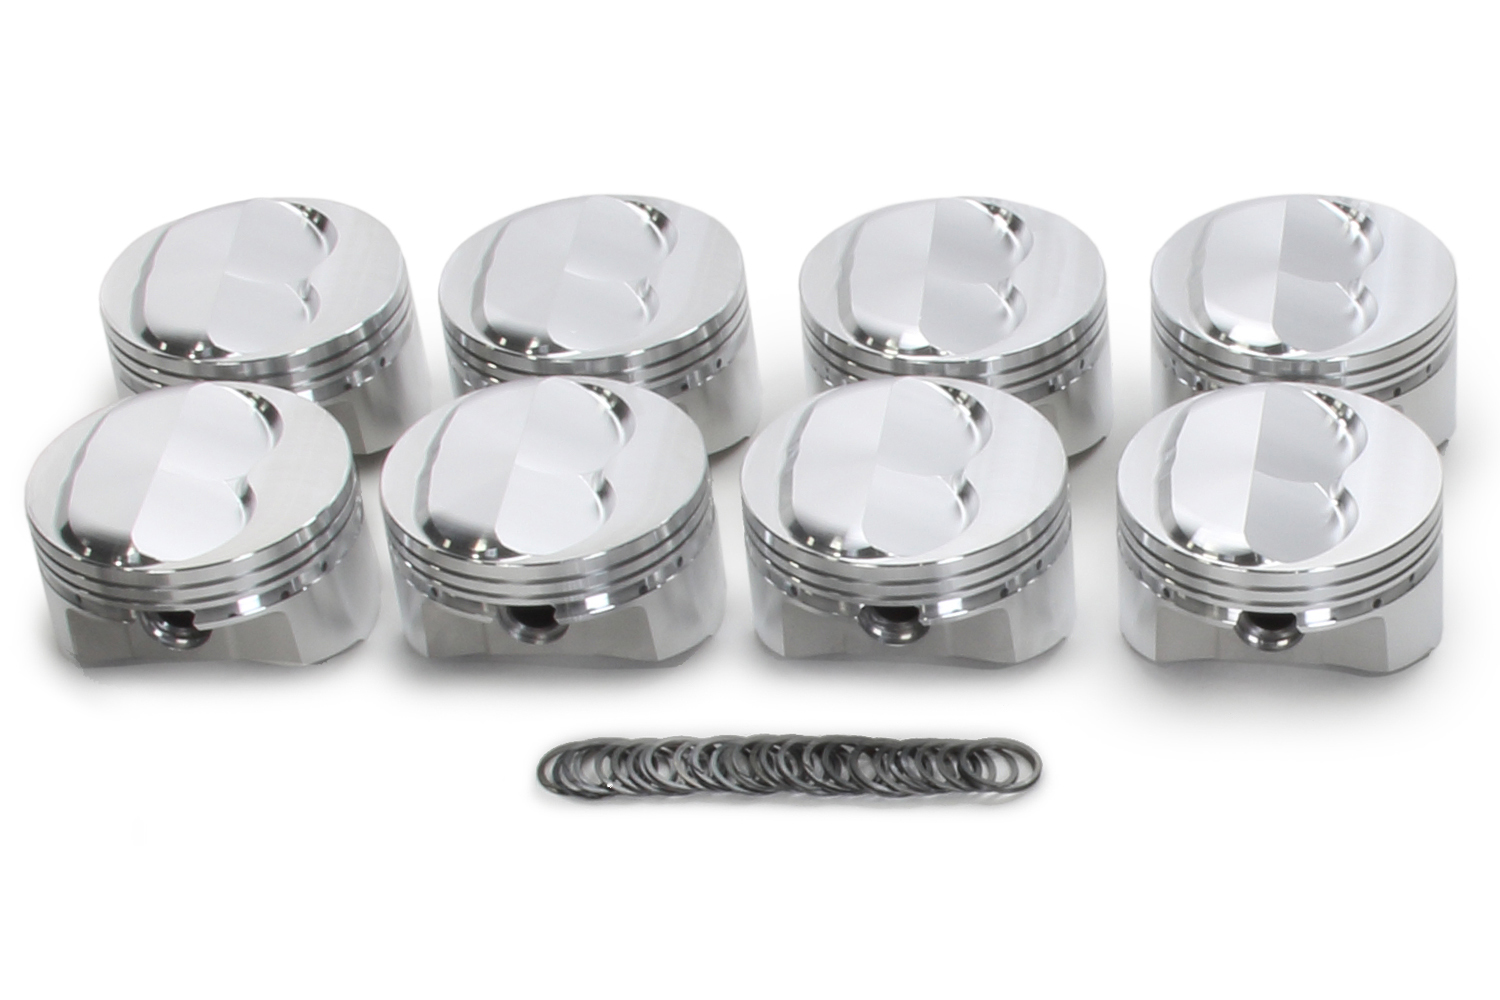 SRP Pistons 142022 Piston, 400 Dome, Forged, 4.165 in Bore, 1/16 x 1/16 x 3/16 in Ring Grooves, Plus 4.00 cc, Small Block Chevy, Set of 8